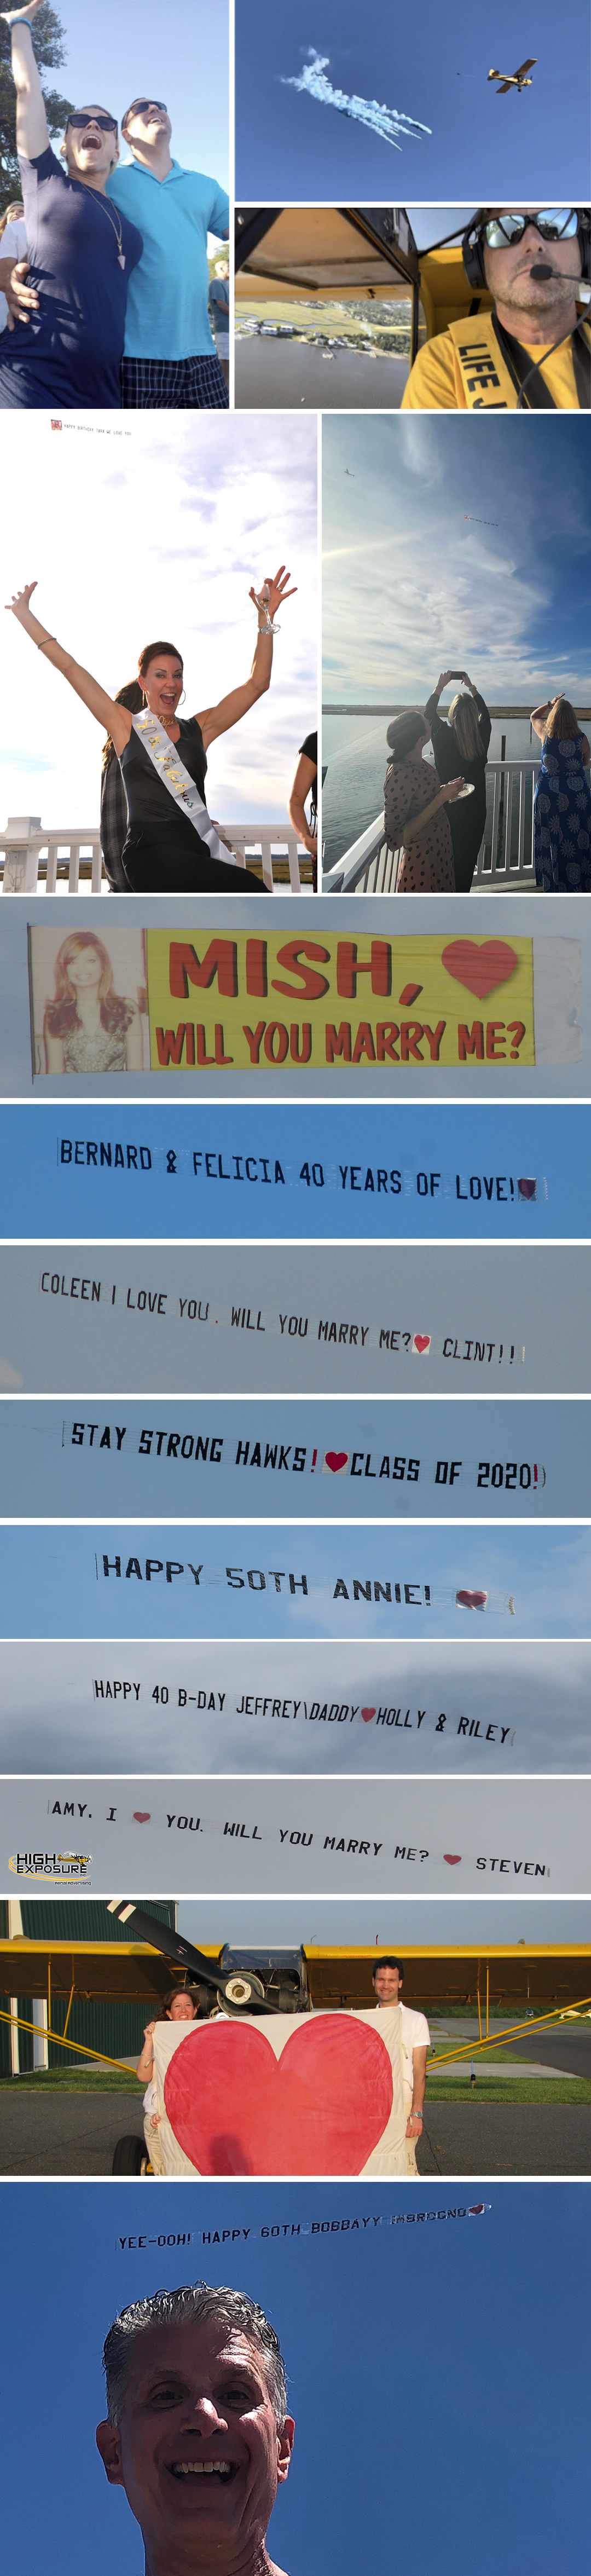 Will you marry me airplane banner proposal